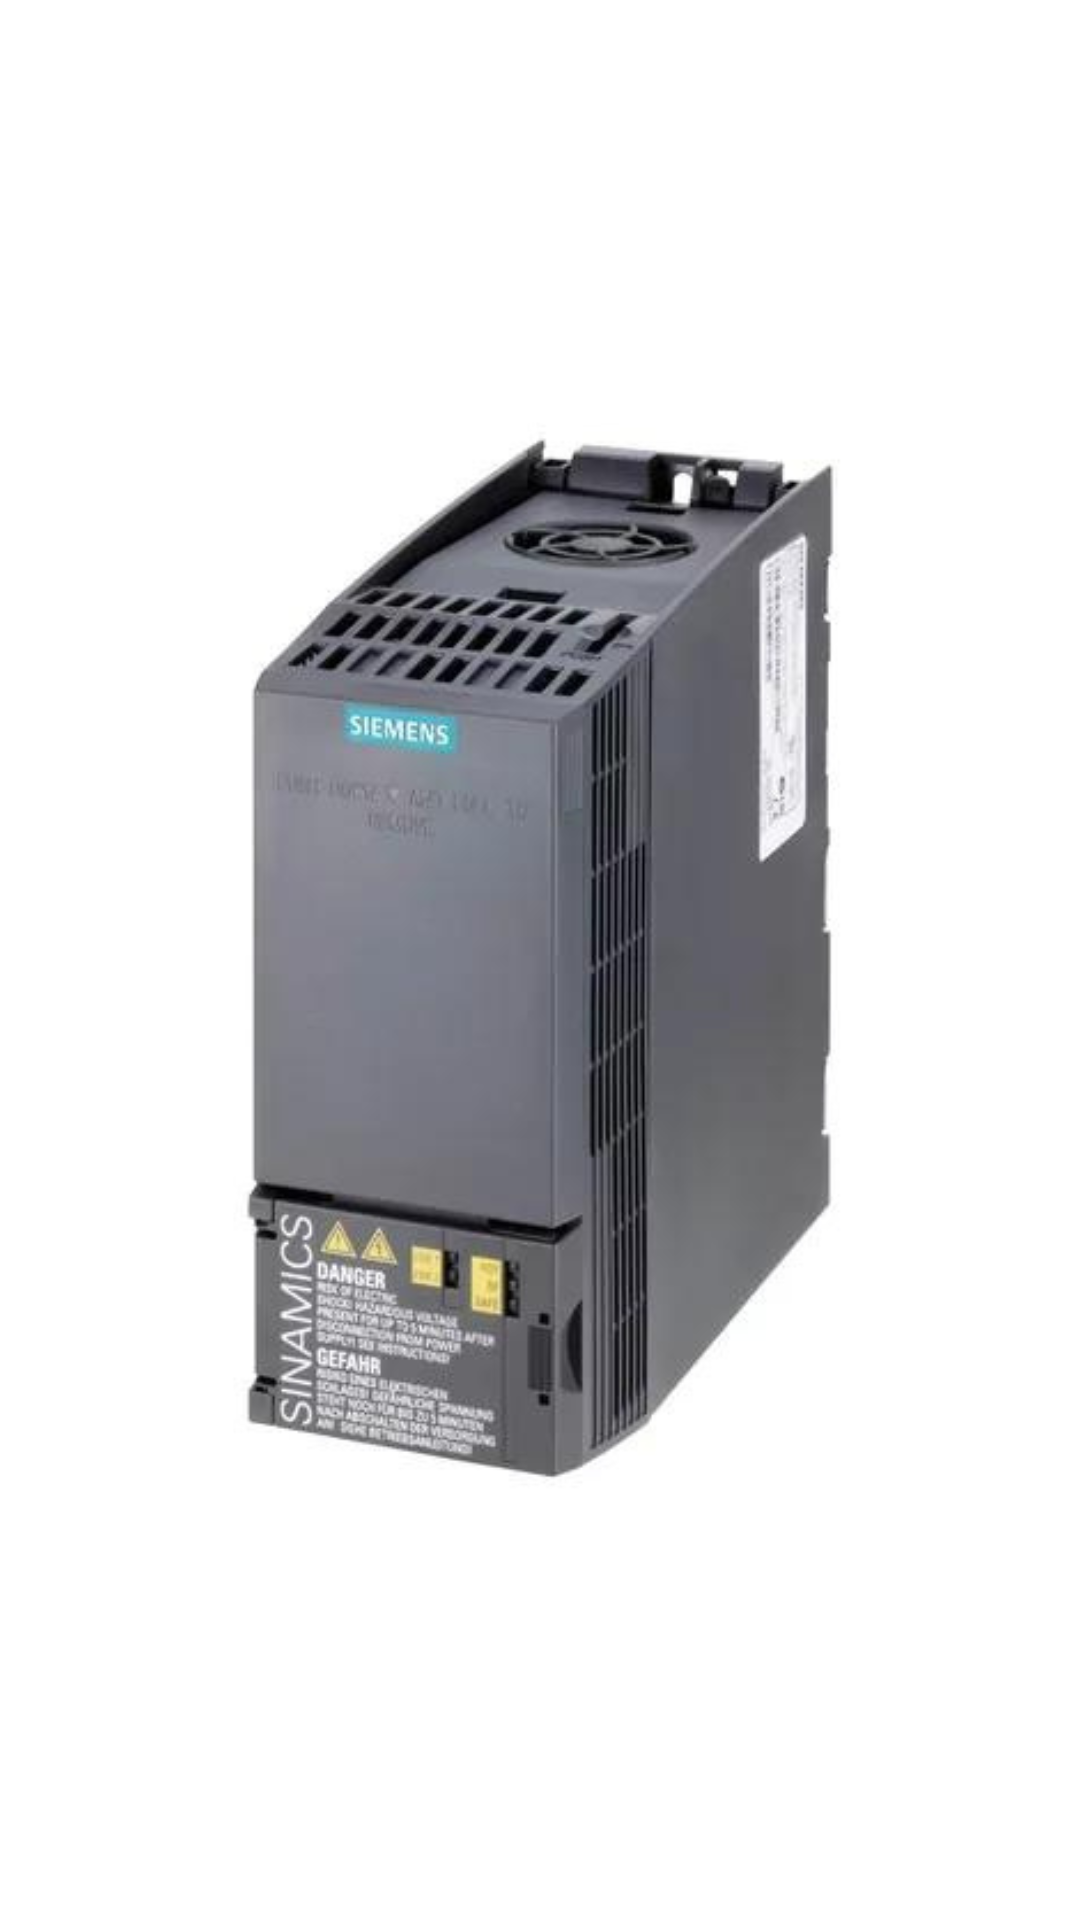 6SL3210-1KE13-2AF2 Siemens SINAMICS G120C RATED POWER 1,1KW WITH 150% OVERLOAD FOR 3 SEC 3AC380-480V +10/-20% 47-63HZ INTEGRATED FILTER CLASS A I/O-INTERFACE: 6DI, 2DO,1AI,1AO SAFE TORQUE OFF INTEGRATED FIELDBUS: PROFINET-PN PROTECTION: IP20